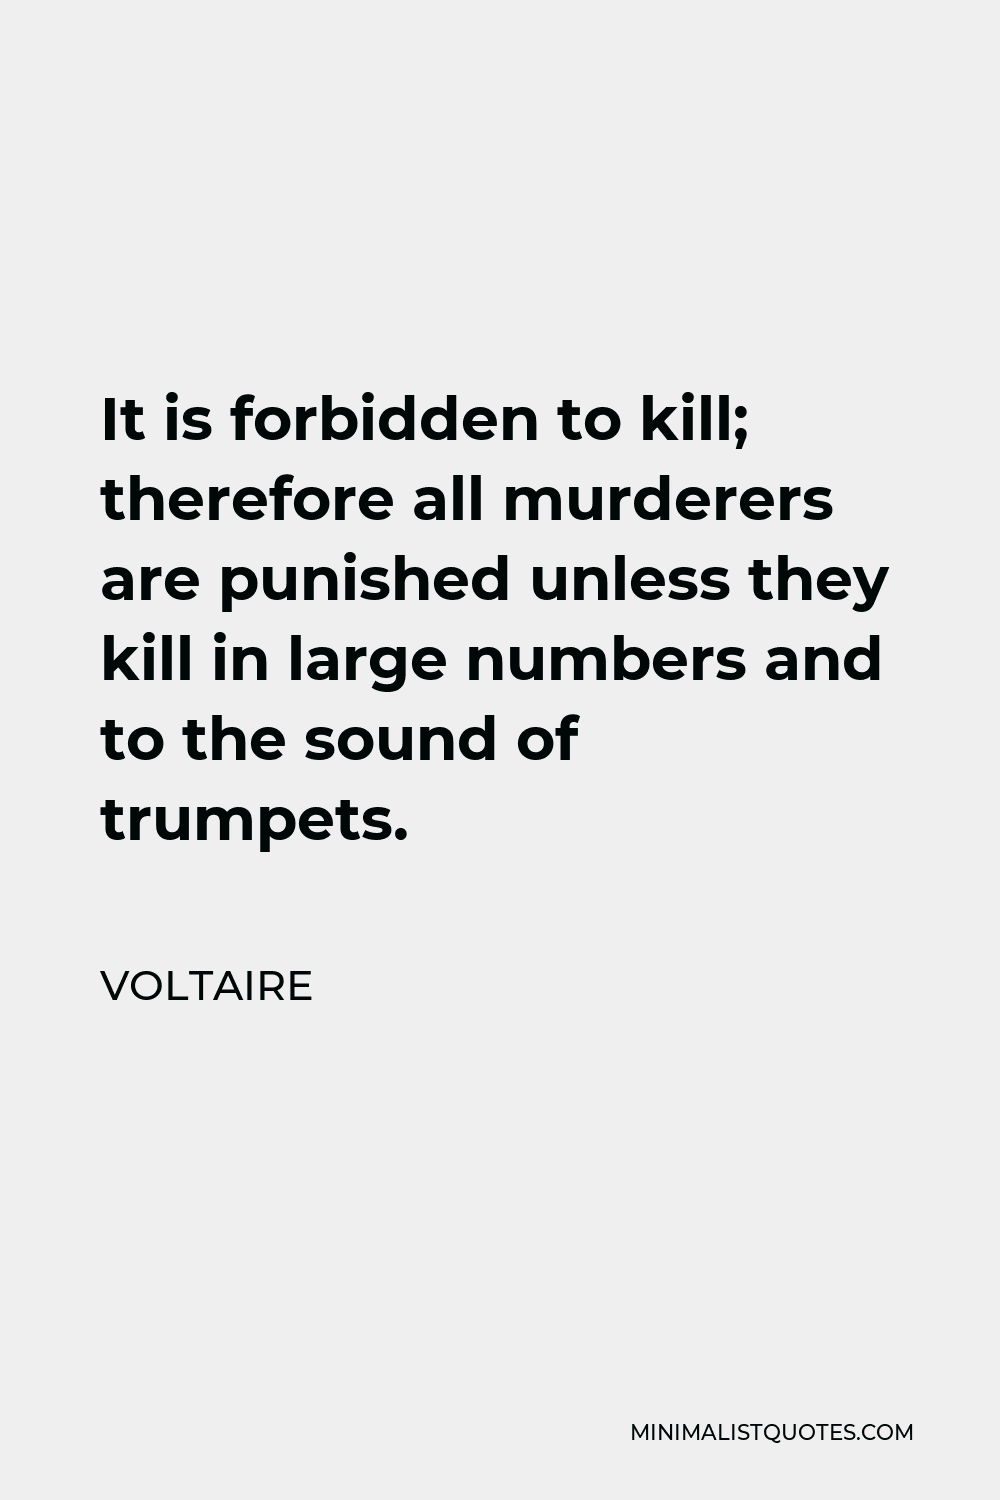 Voltaire Quote - It is forbidden to kill; therefore all murderers are punished unless they kill in large numbers and to the sound of trumpets.